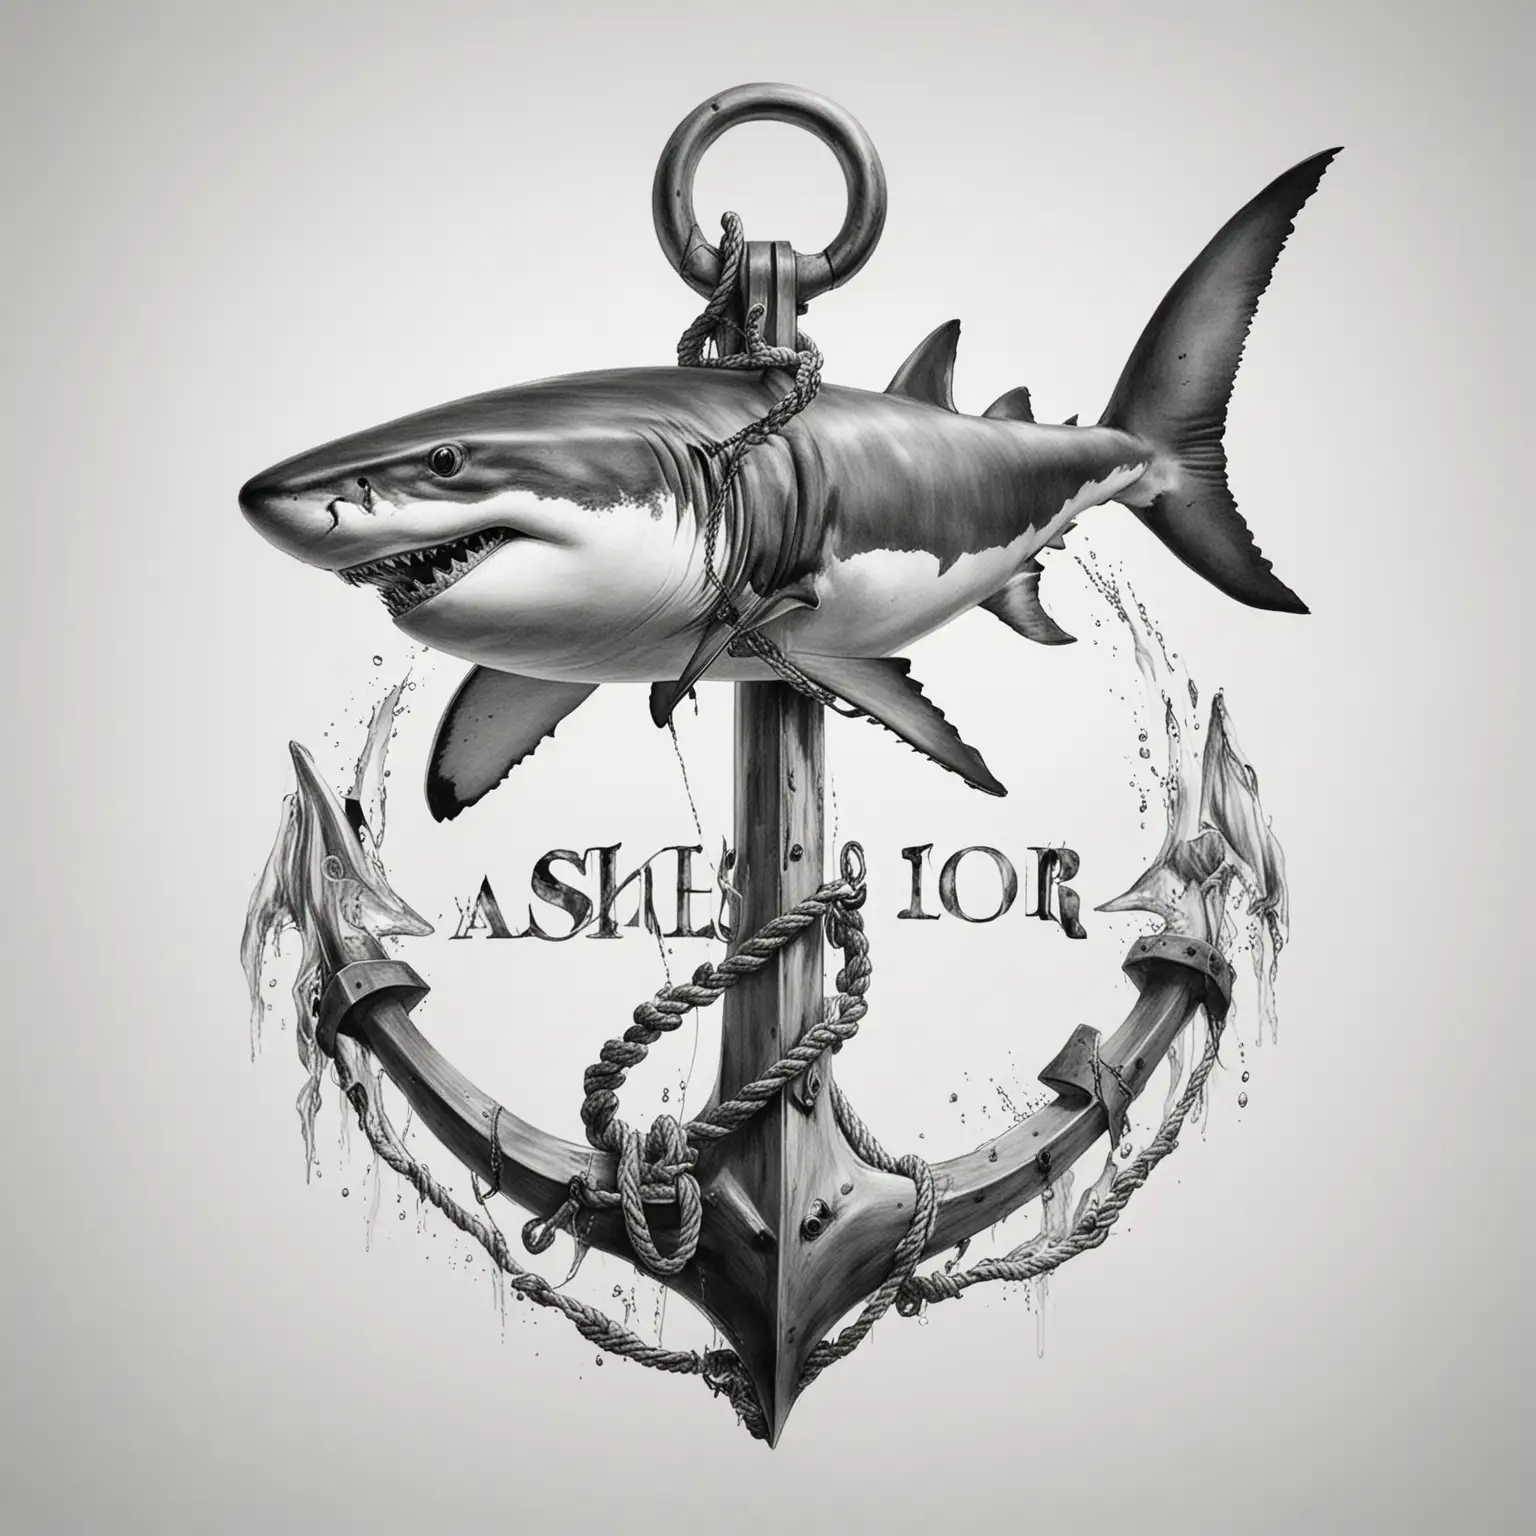 Realistic Black and White Drawing of an Anchor and Shark on a Free White Background